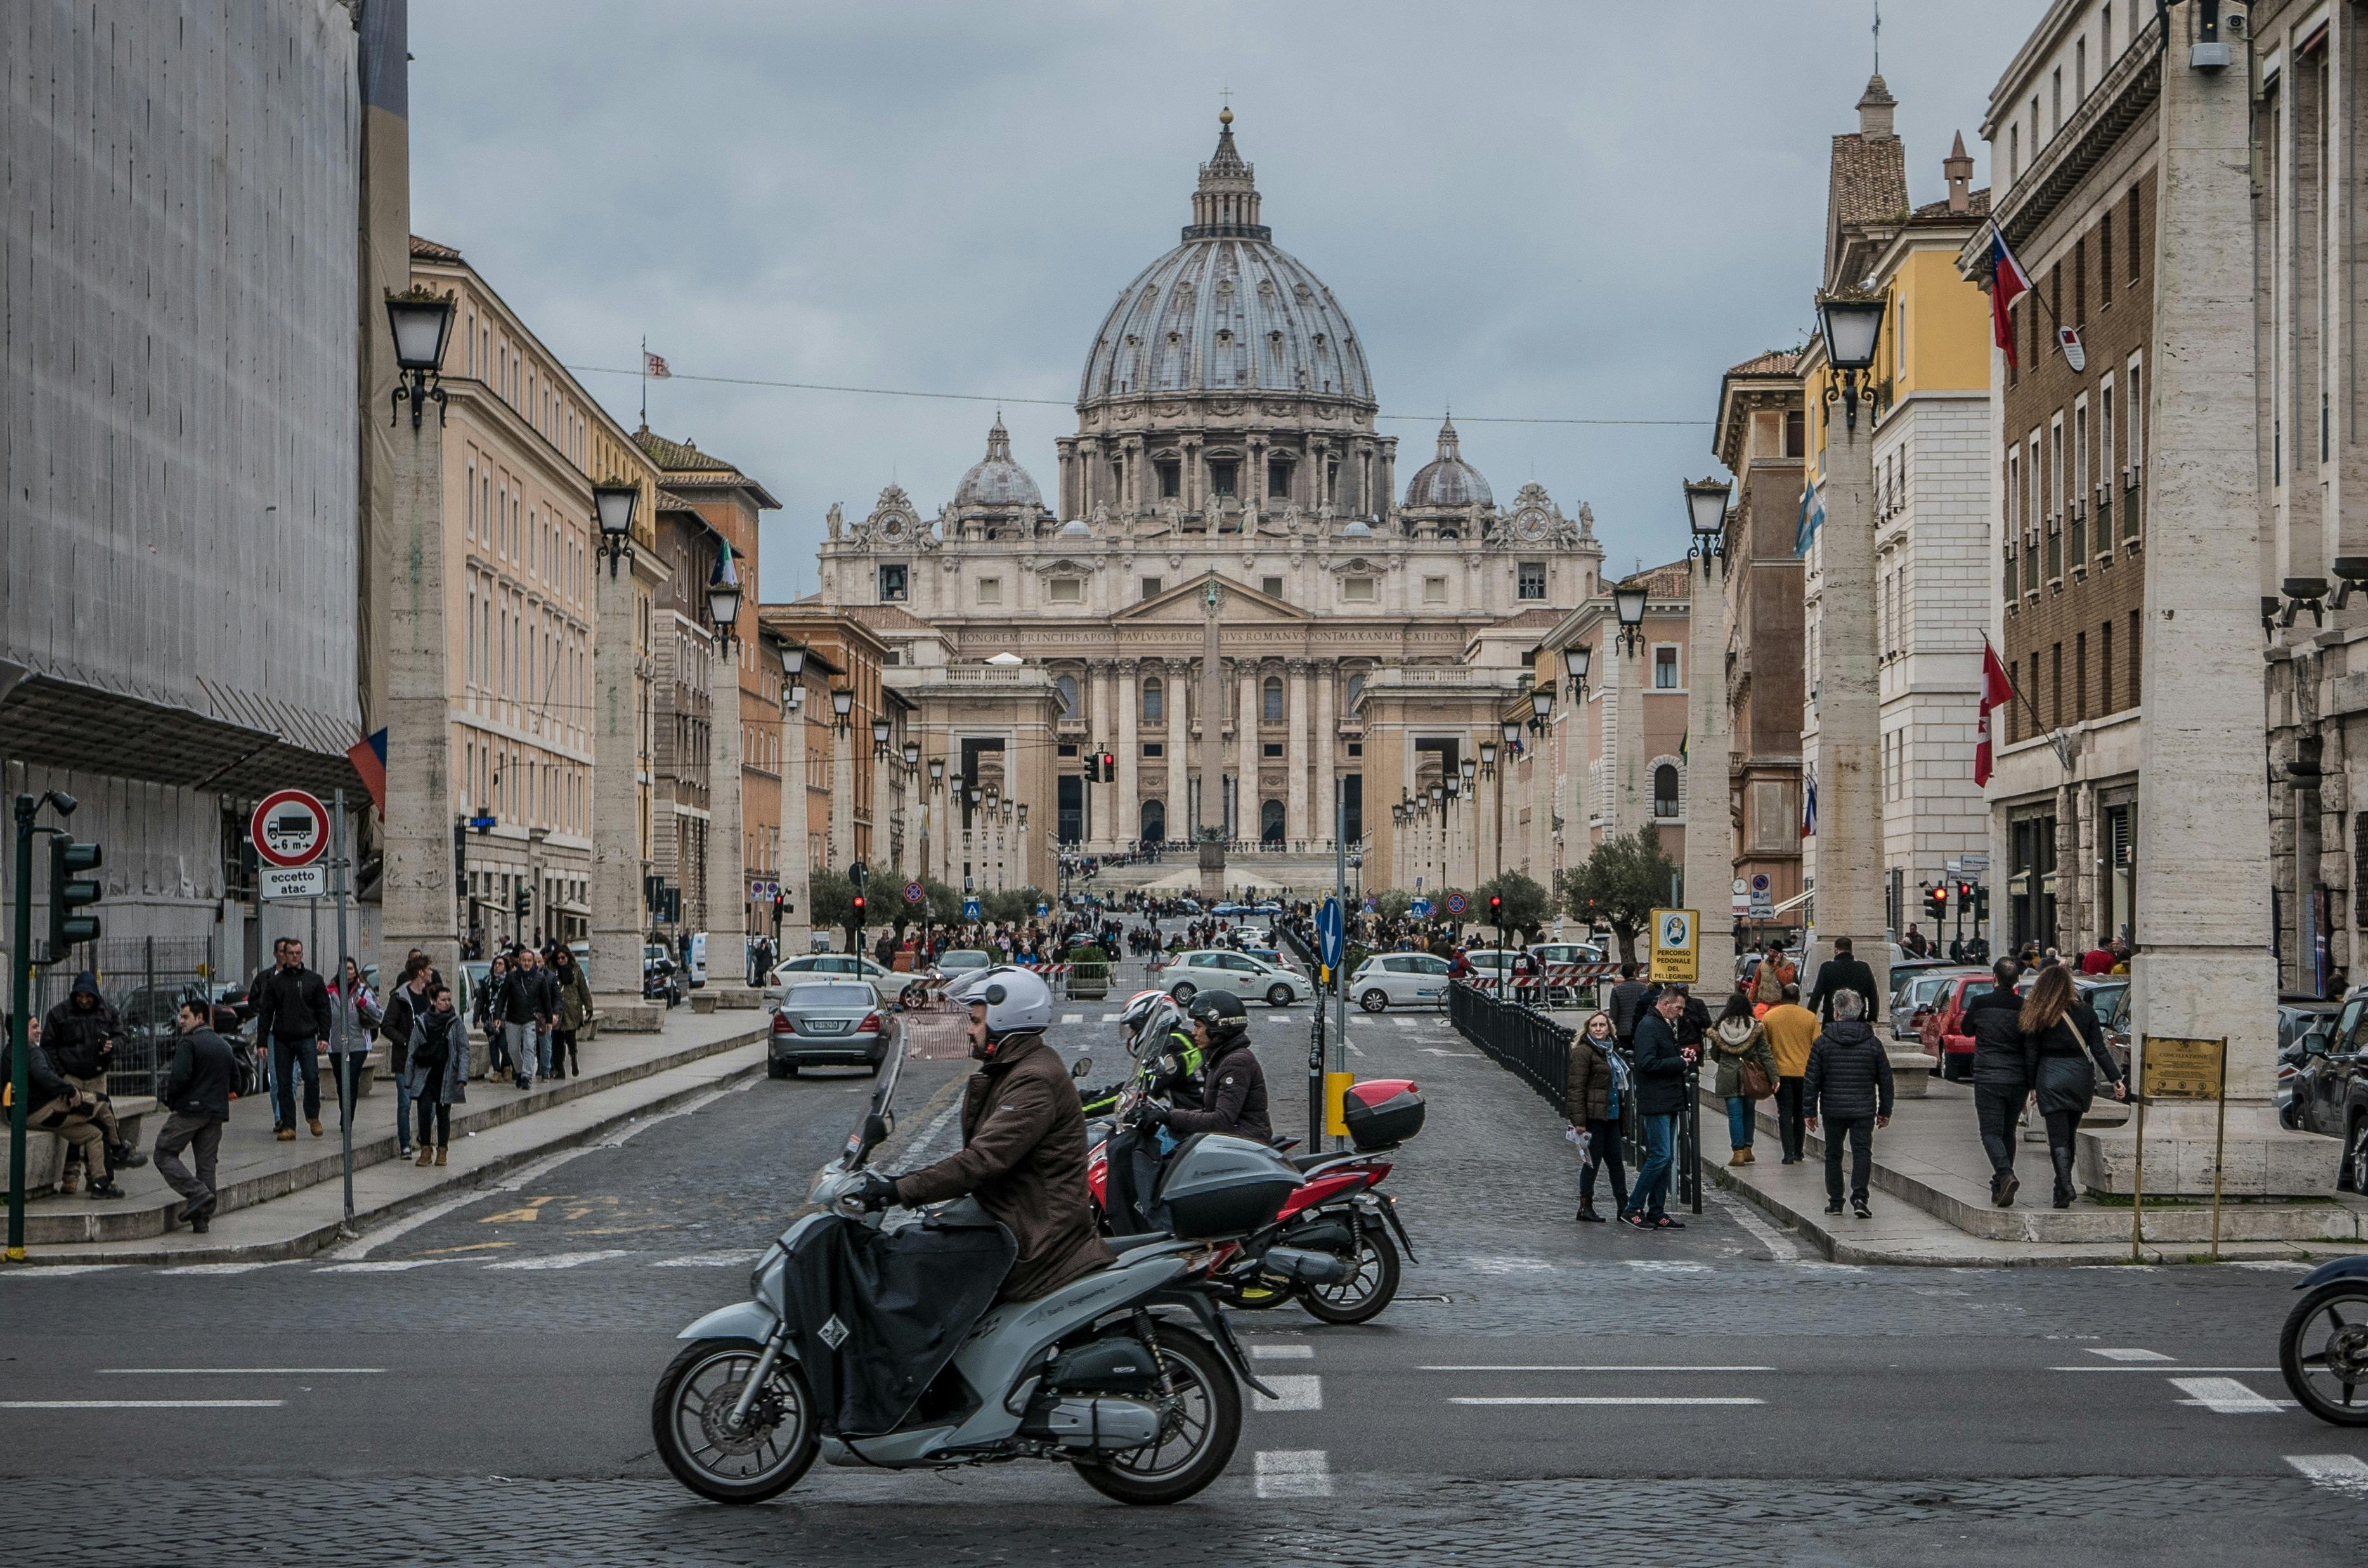 A busy street scene in Rome, Italy